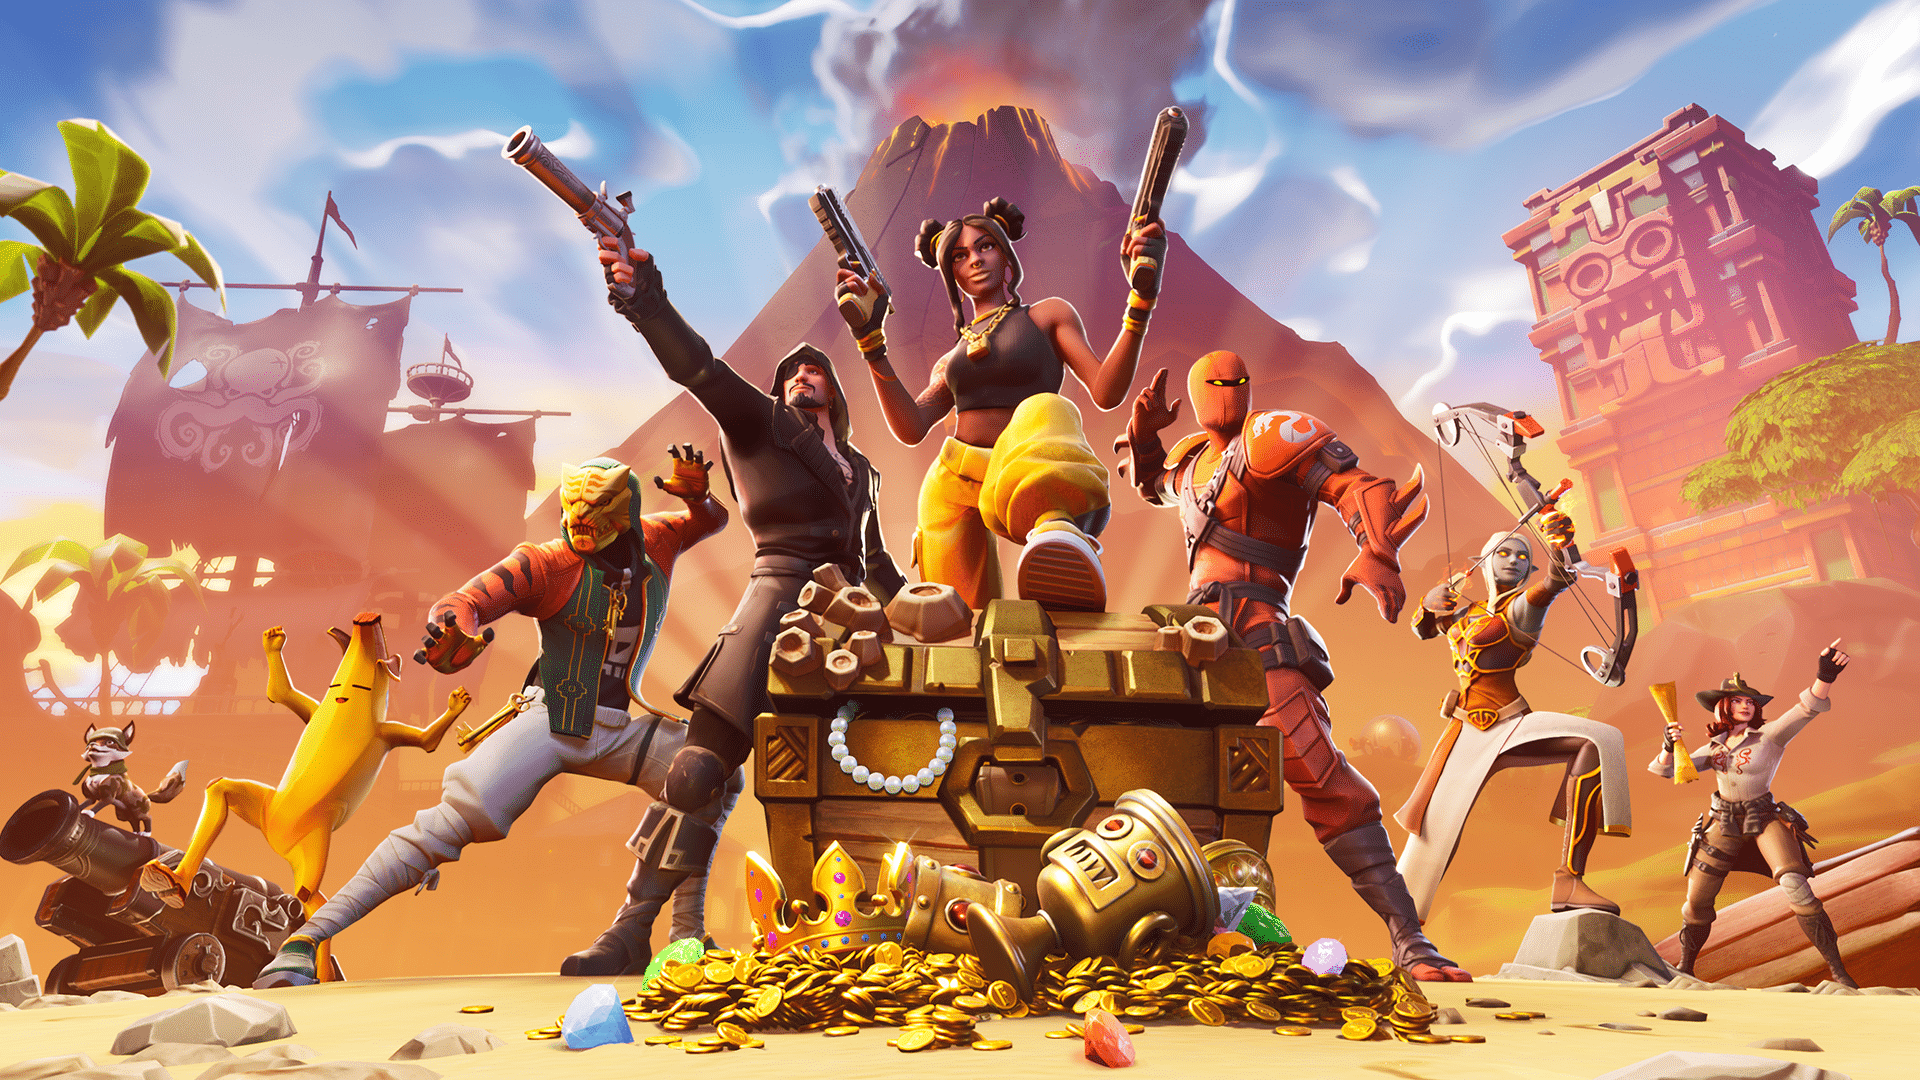 Go Rogue Fortnite Wallpapers